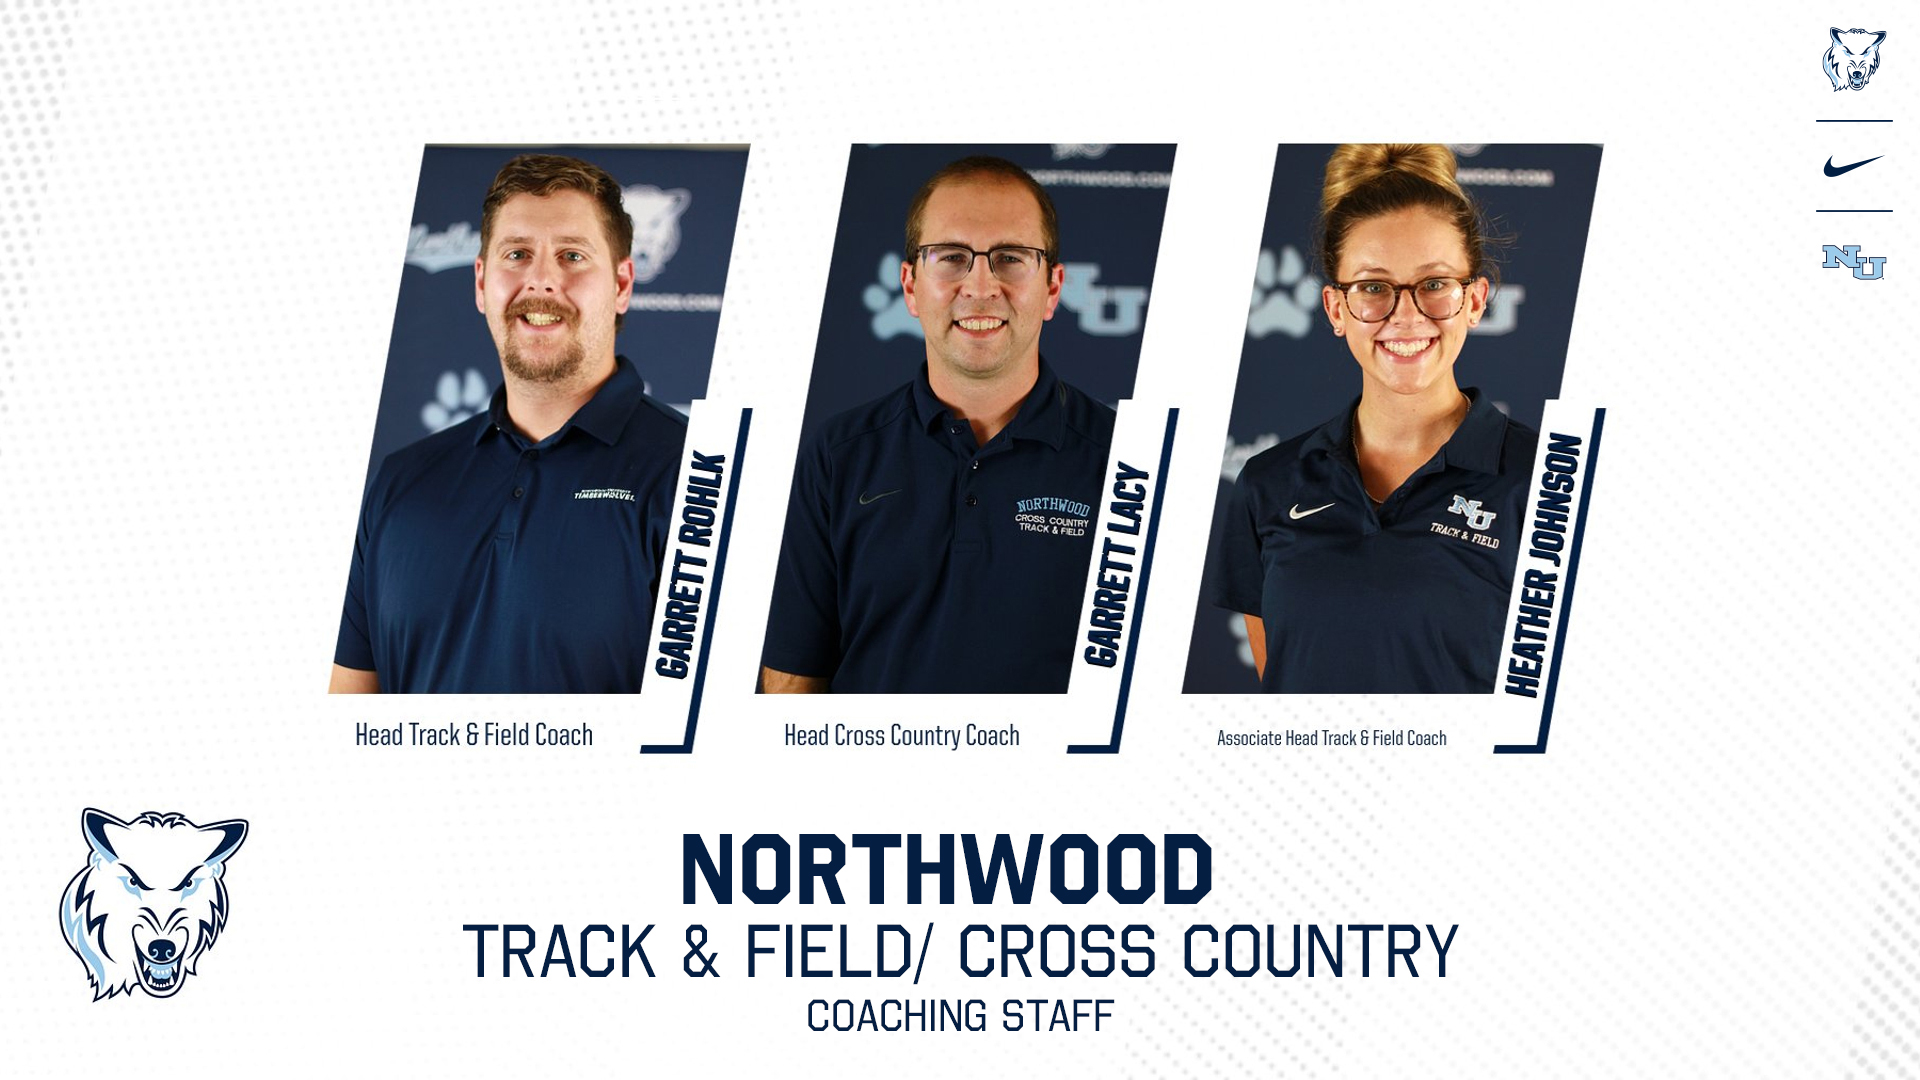 Northwood Athletics Announces Track & Field/ Cross Country Coaching Staff Promotions